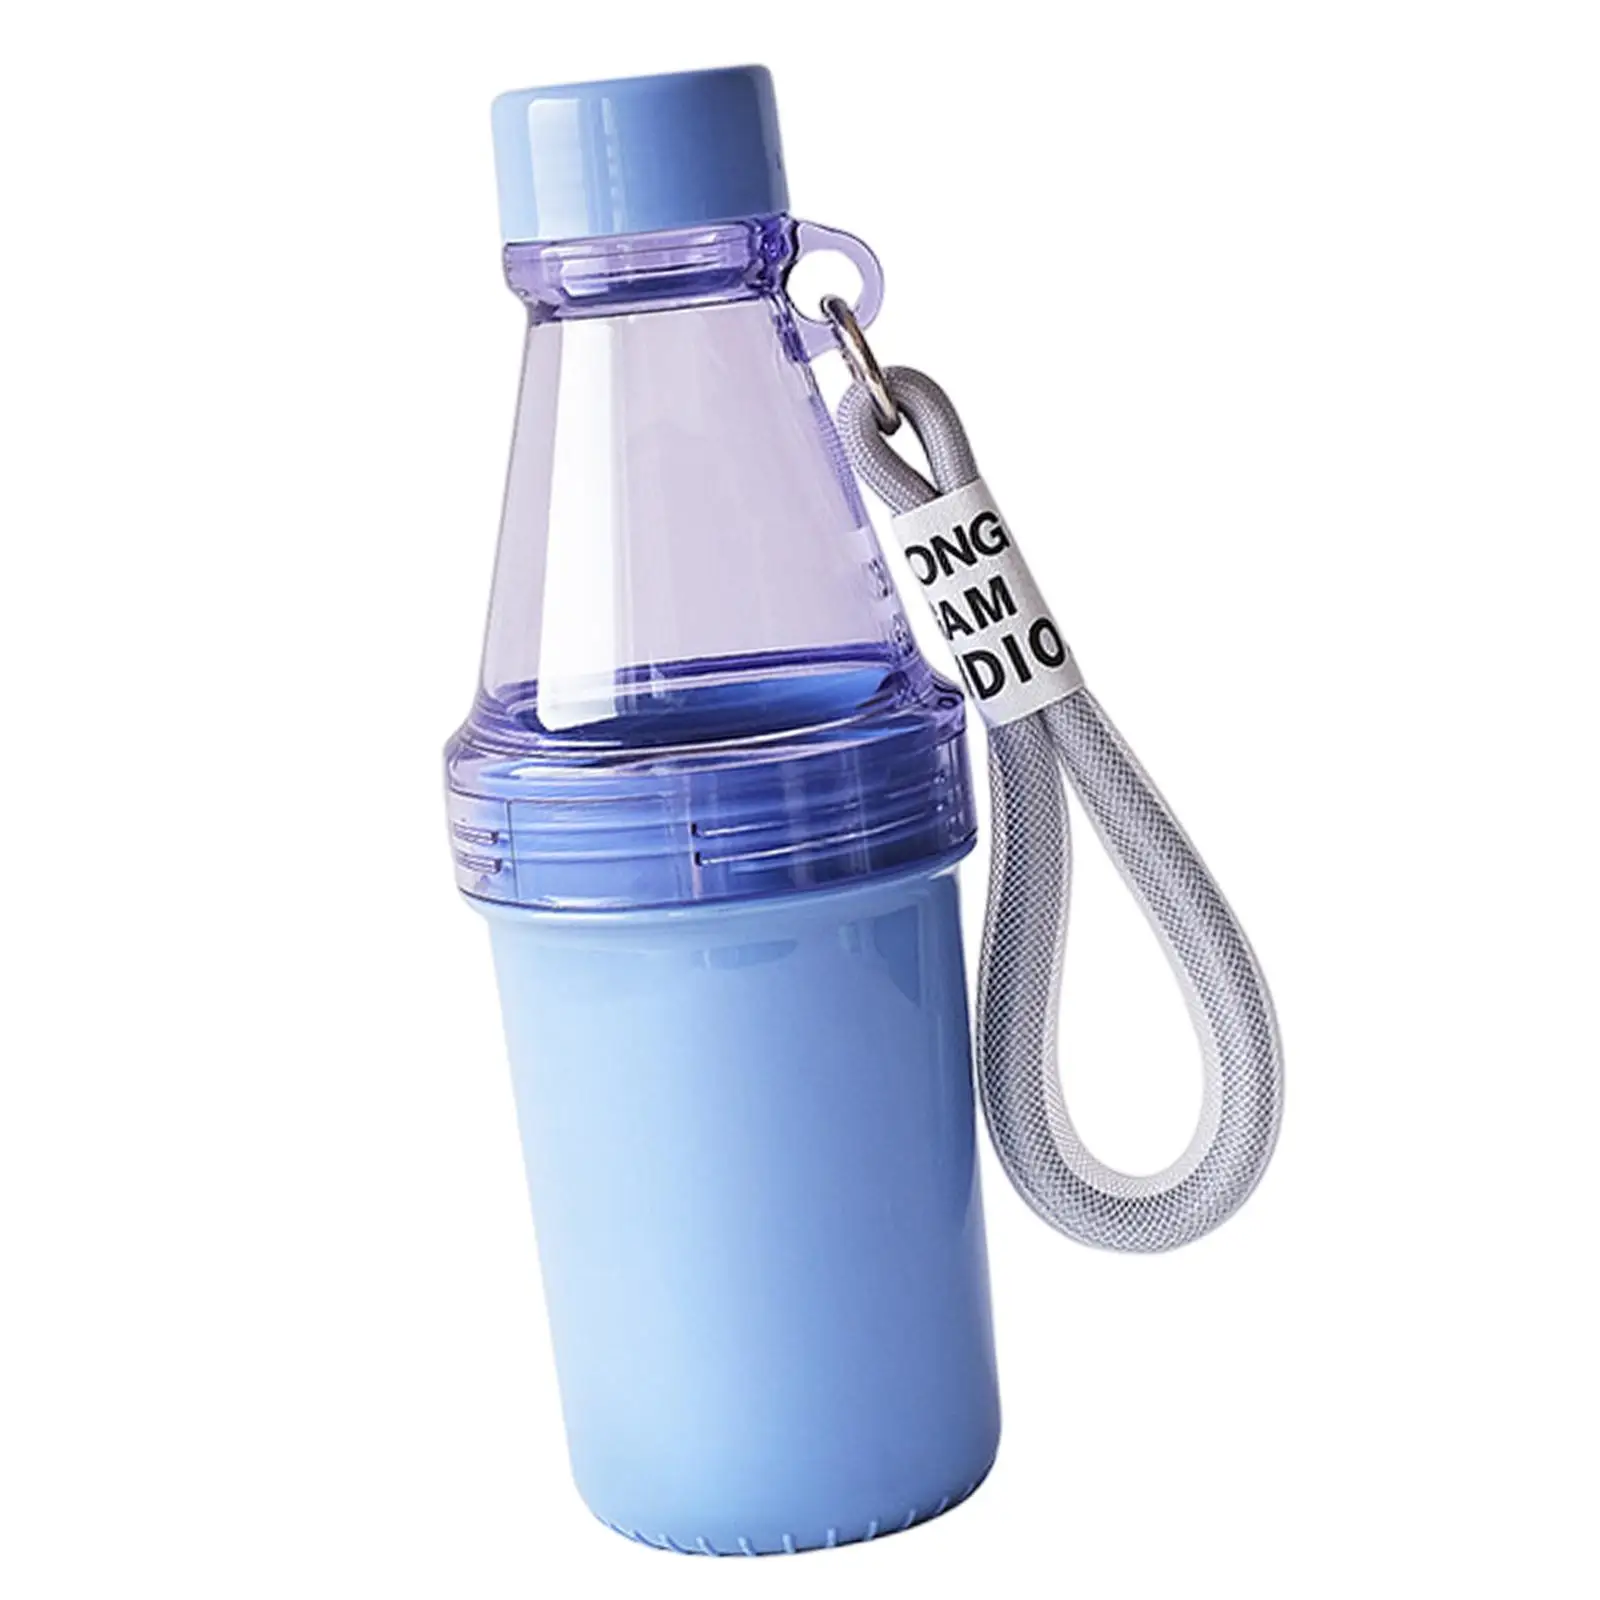 Cold Water Bottle, Sports Bottles, Double Section Cup Drinkware with Sticker